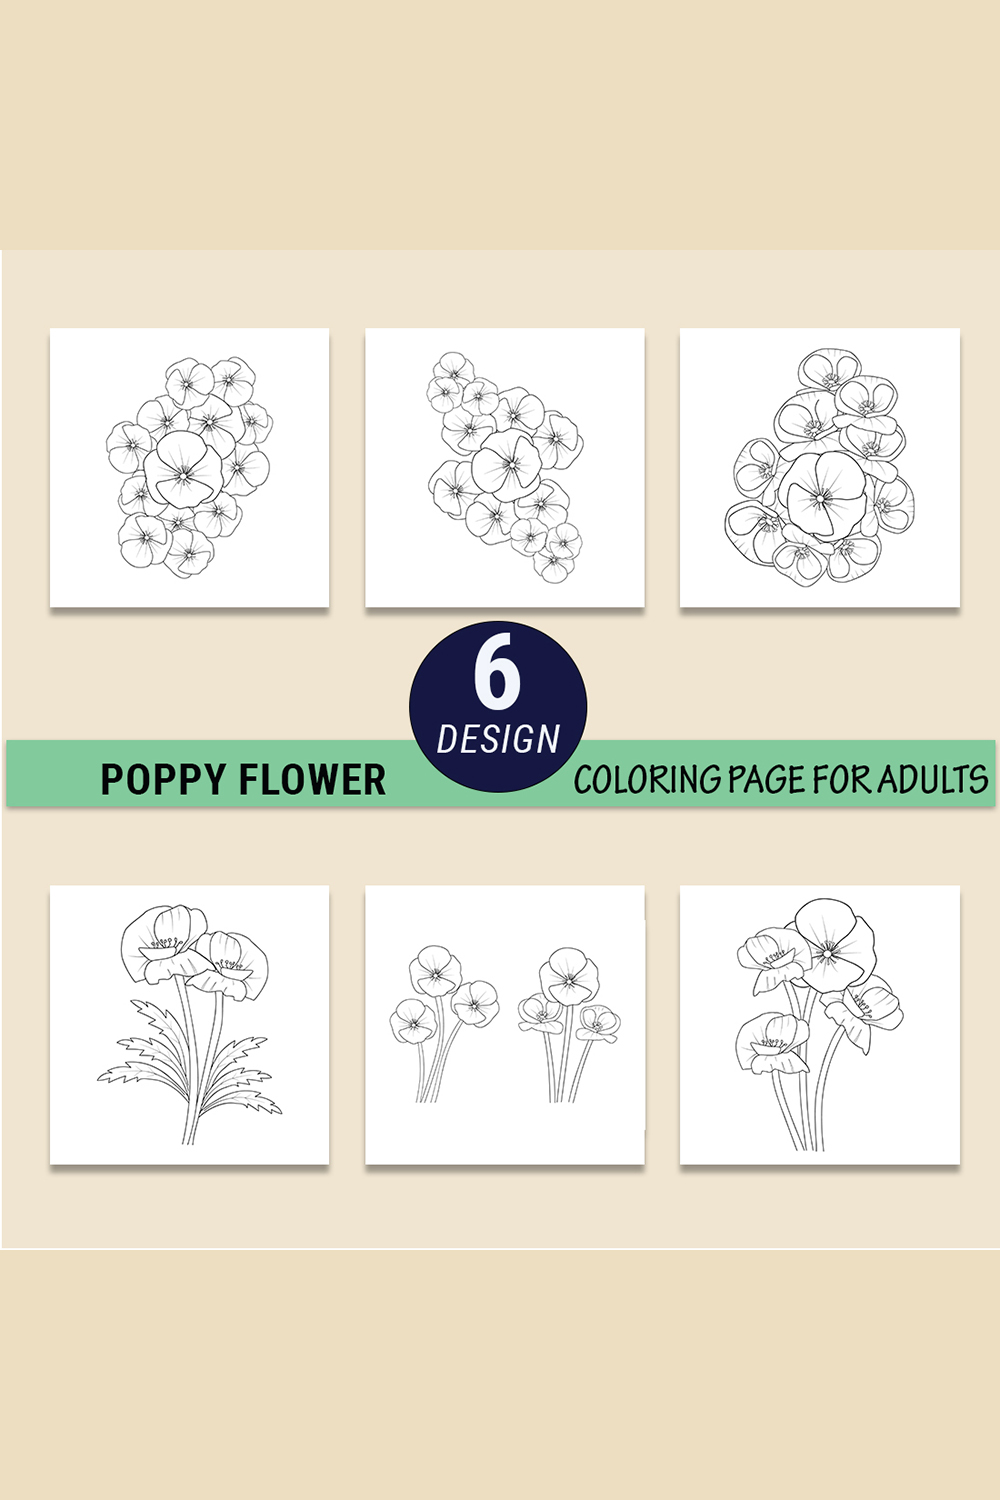 poppy drawing, poppy drawing black and white, realistic poppy flower drawing, outline poppy flower drawing pinterest preview image.